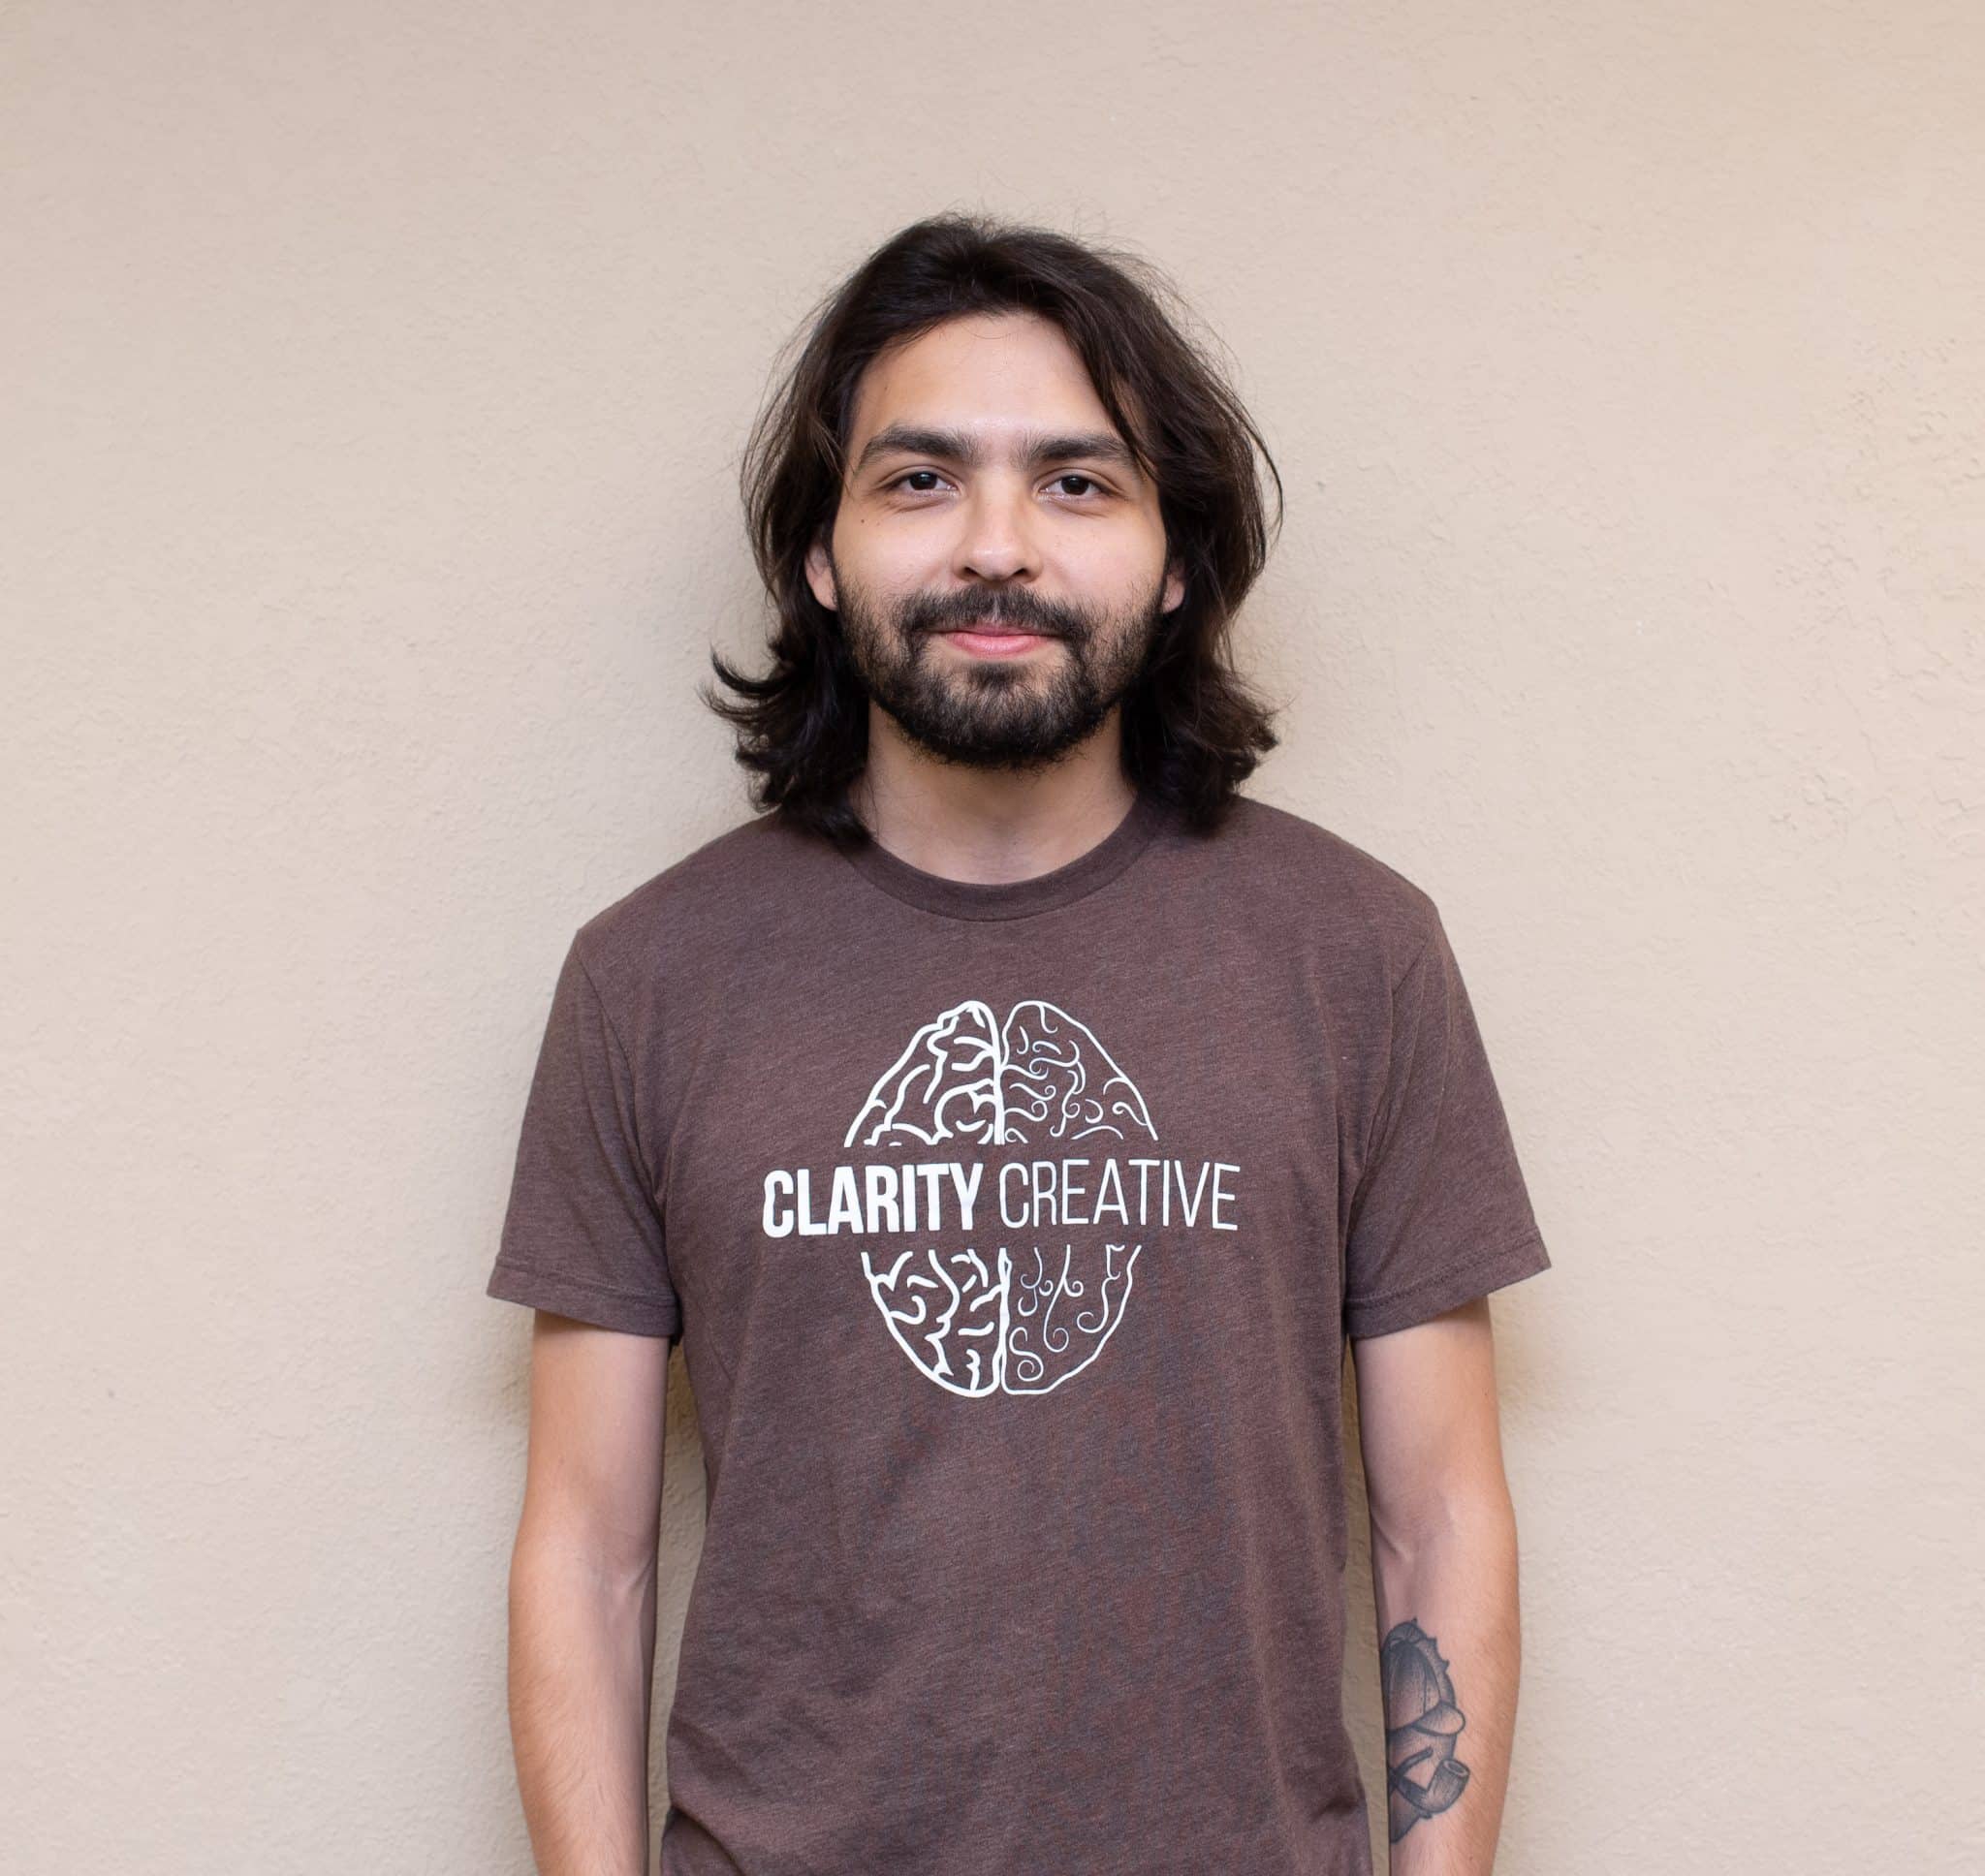 Matt from Clarity Creative. He is wearing a brown Clarity shirt and has shoulder length brown hair with a beard and mustache.